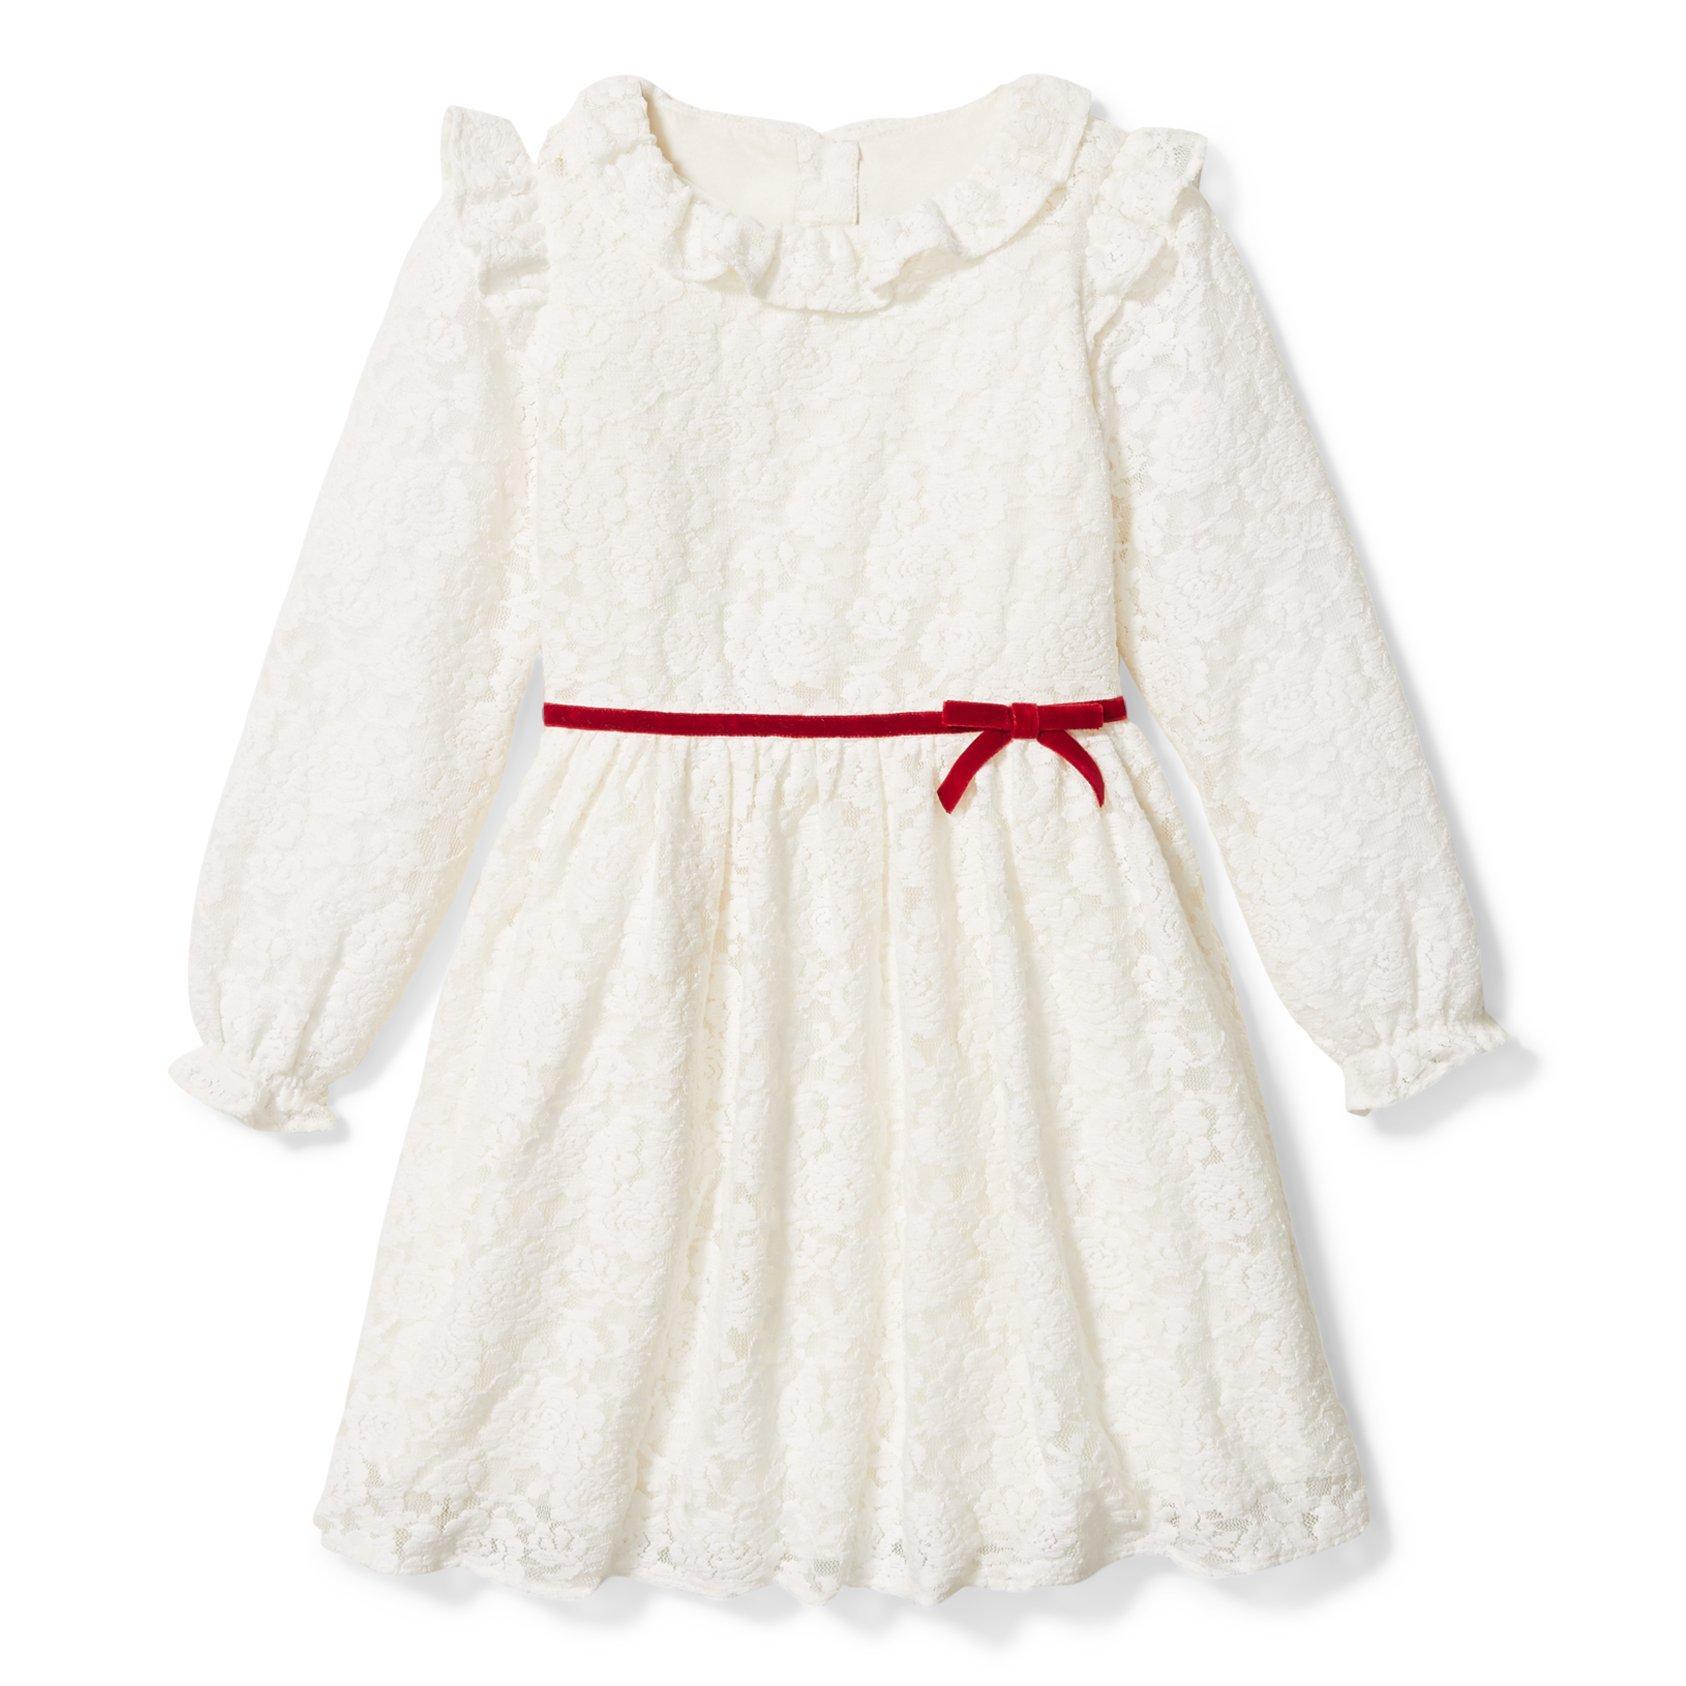 Lace Ruffle Collar Dress image number 0